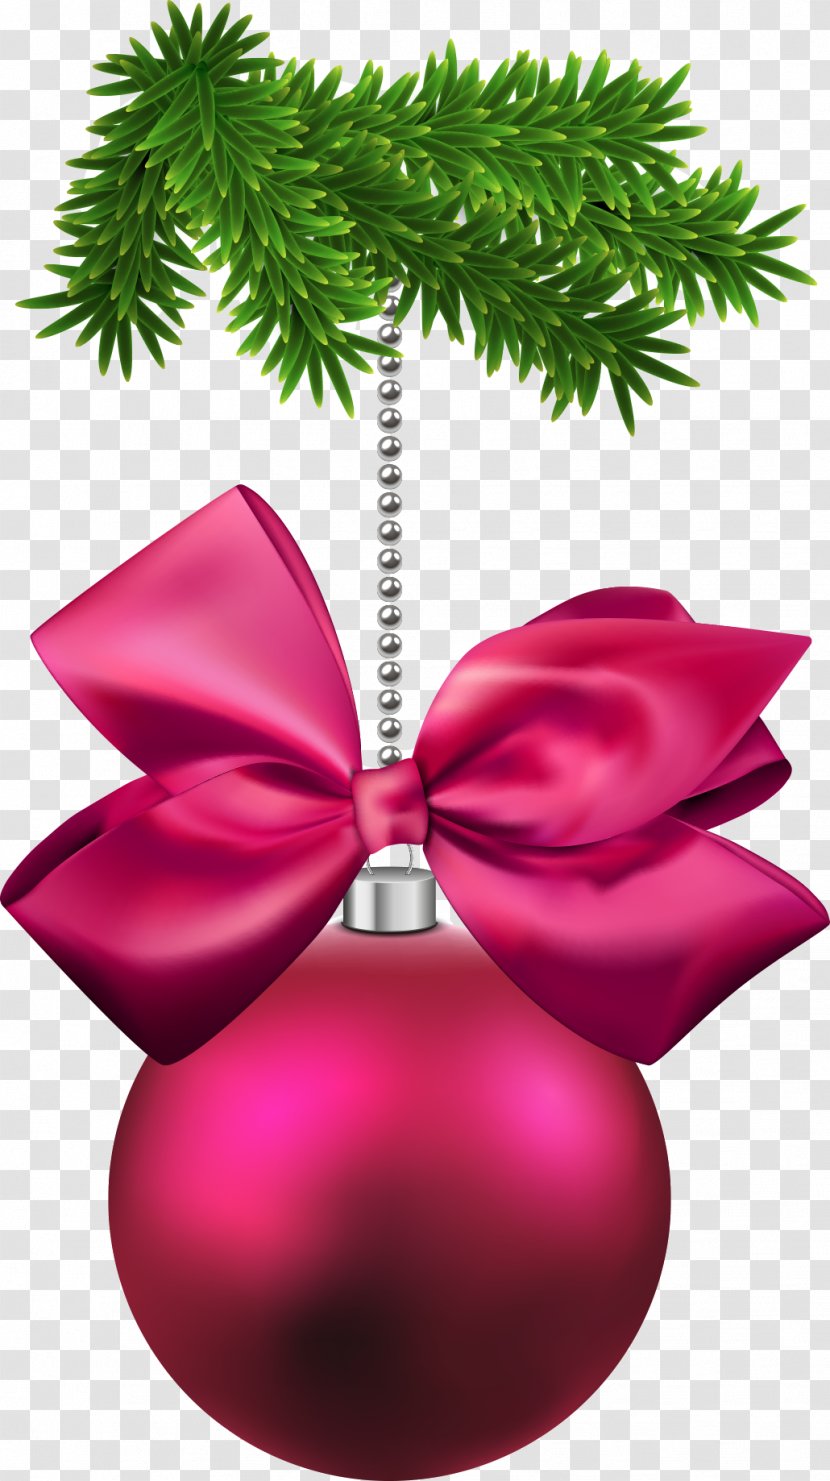 Christmas Ornament Decoration Tree - Bow And Ball Transparent PNG